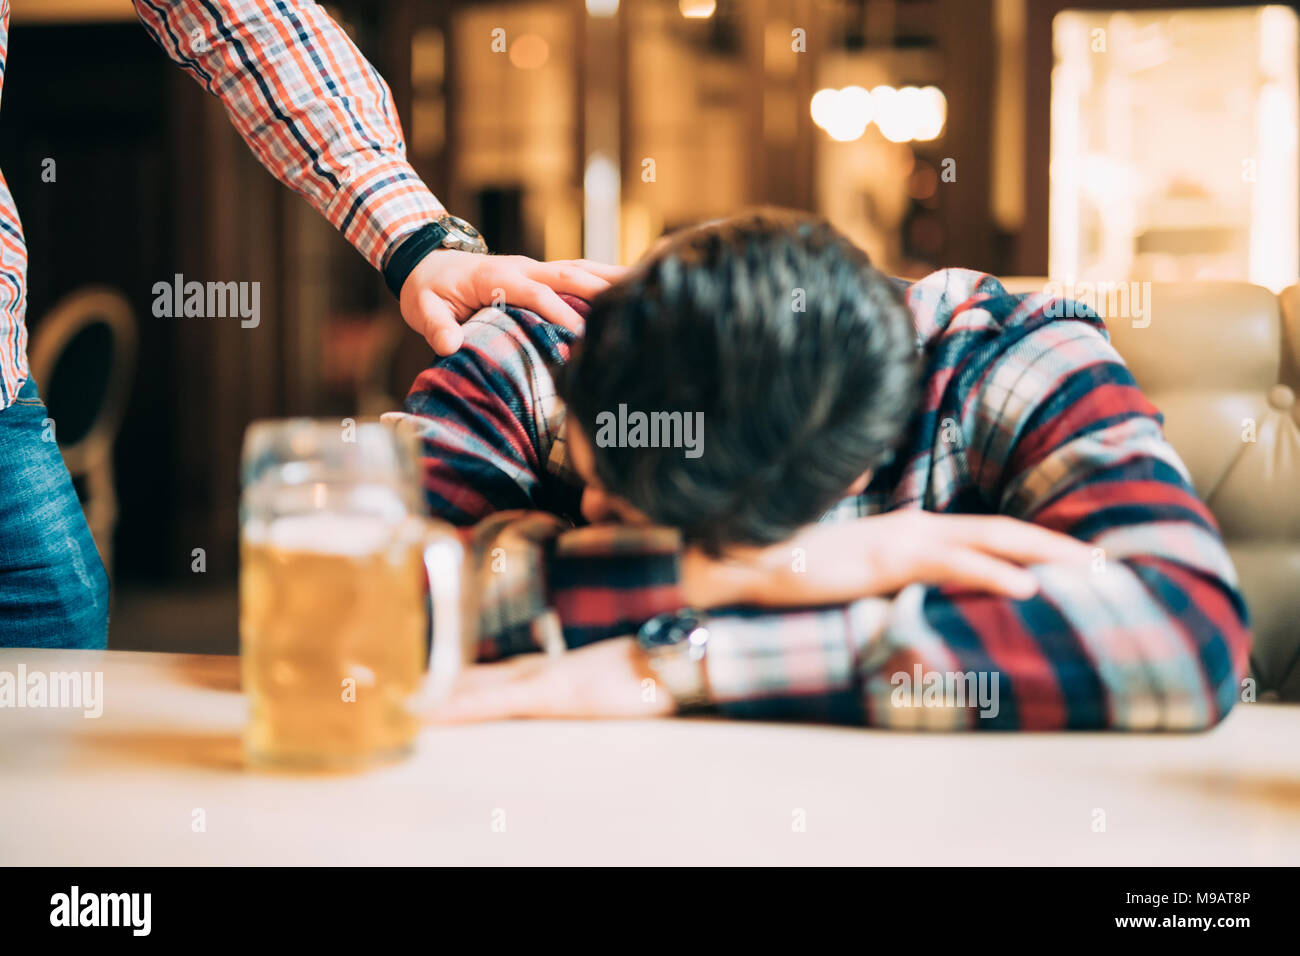 Young man in casual clothes is sleeping near the mug of beer on a table in pub, another man is waking him up. Stock Photo